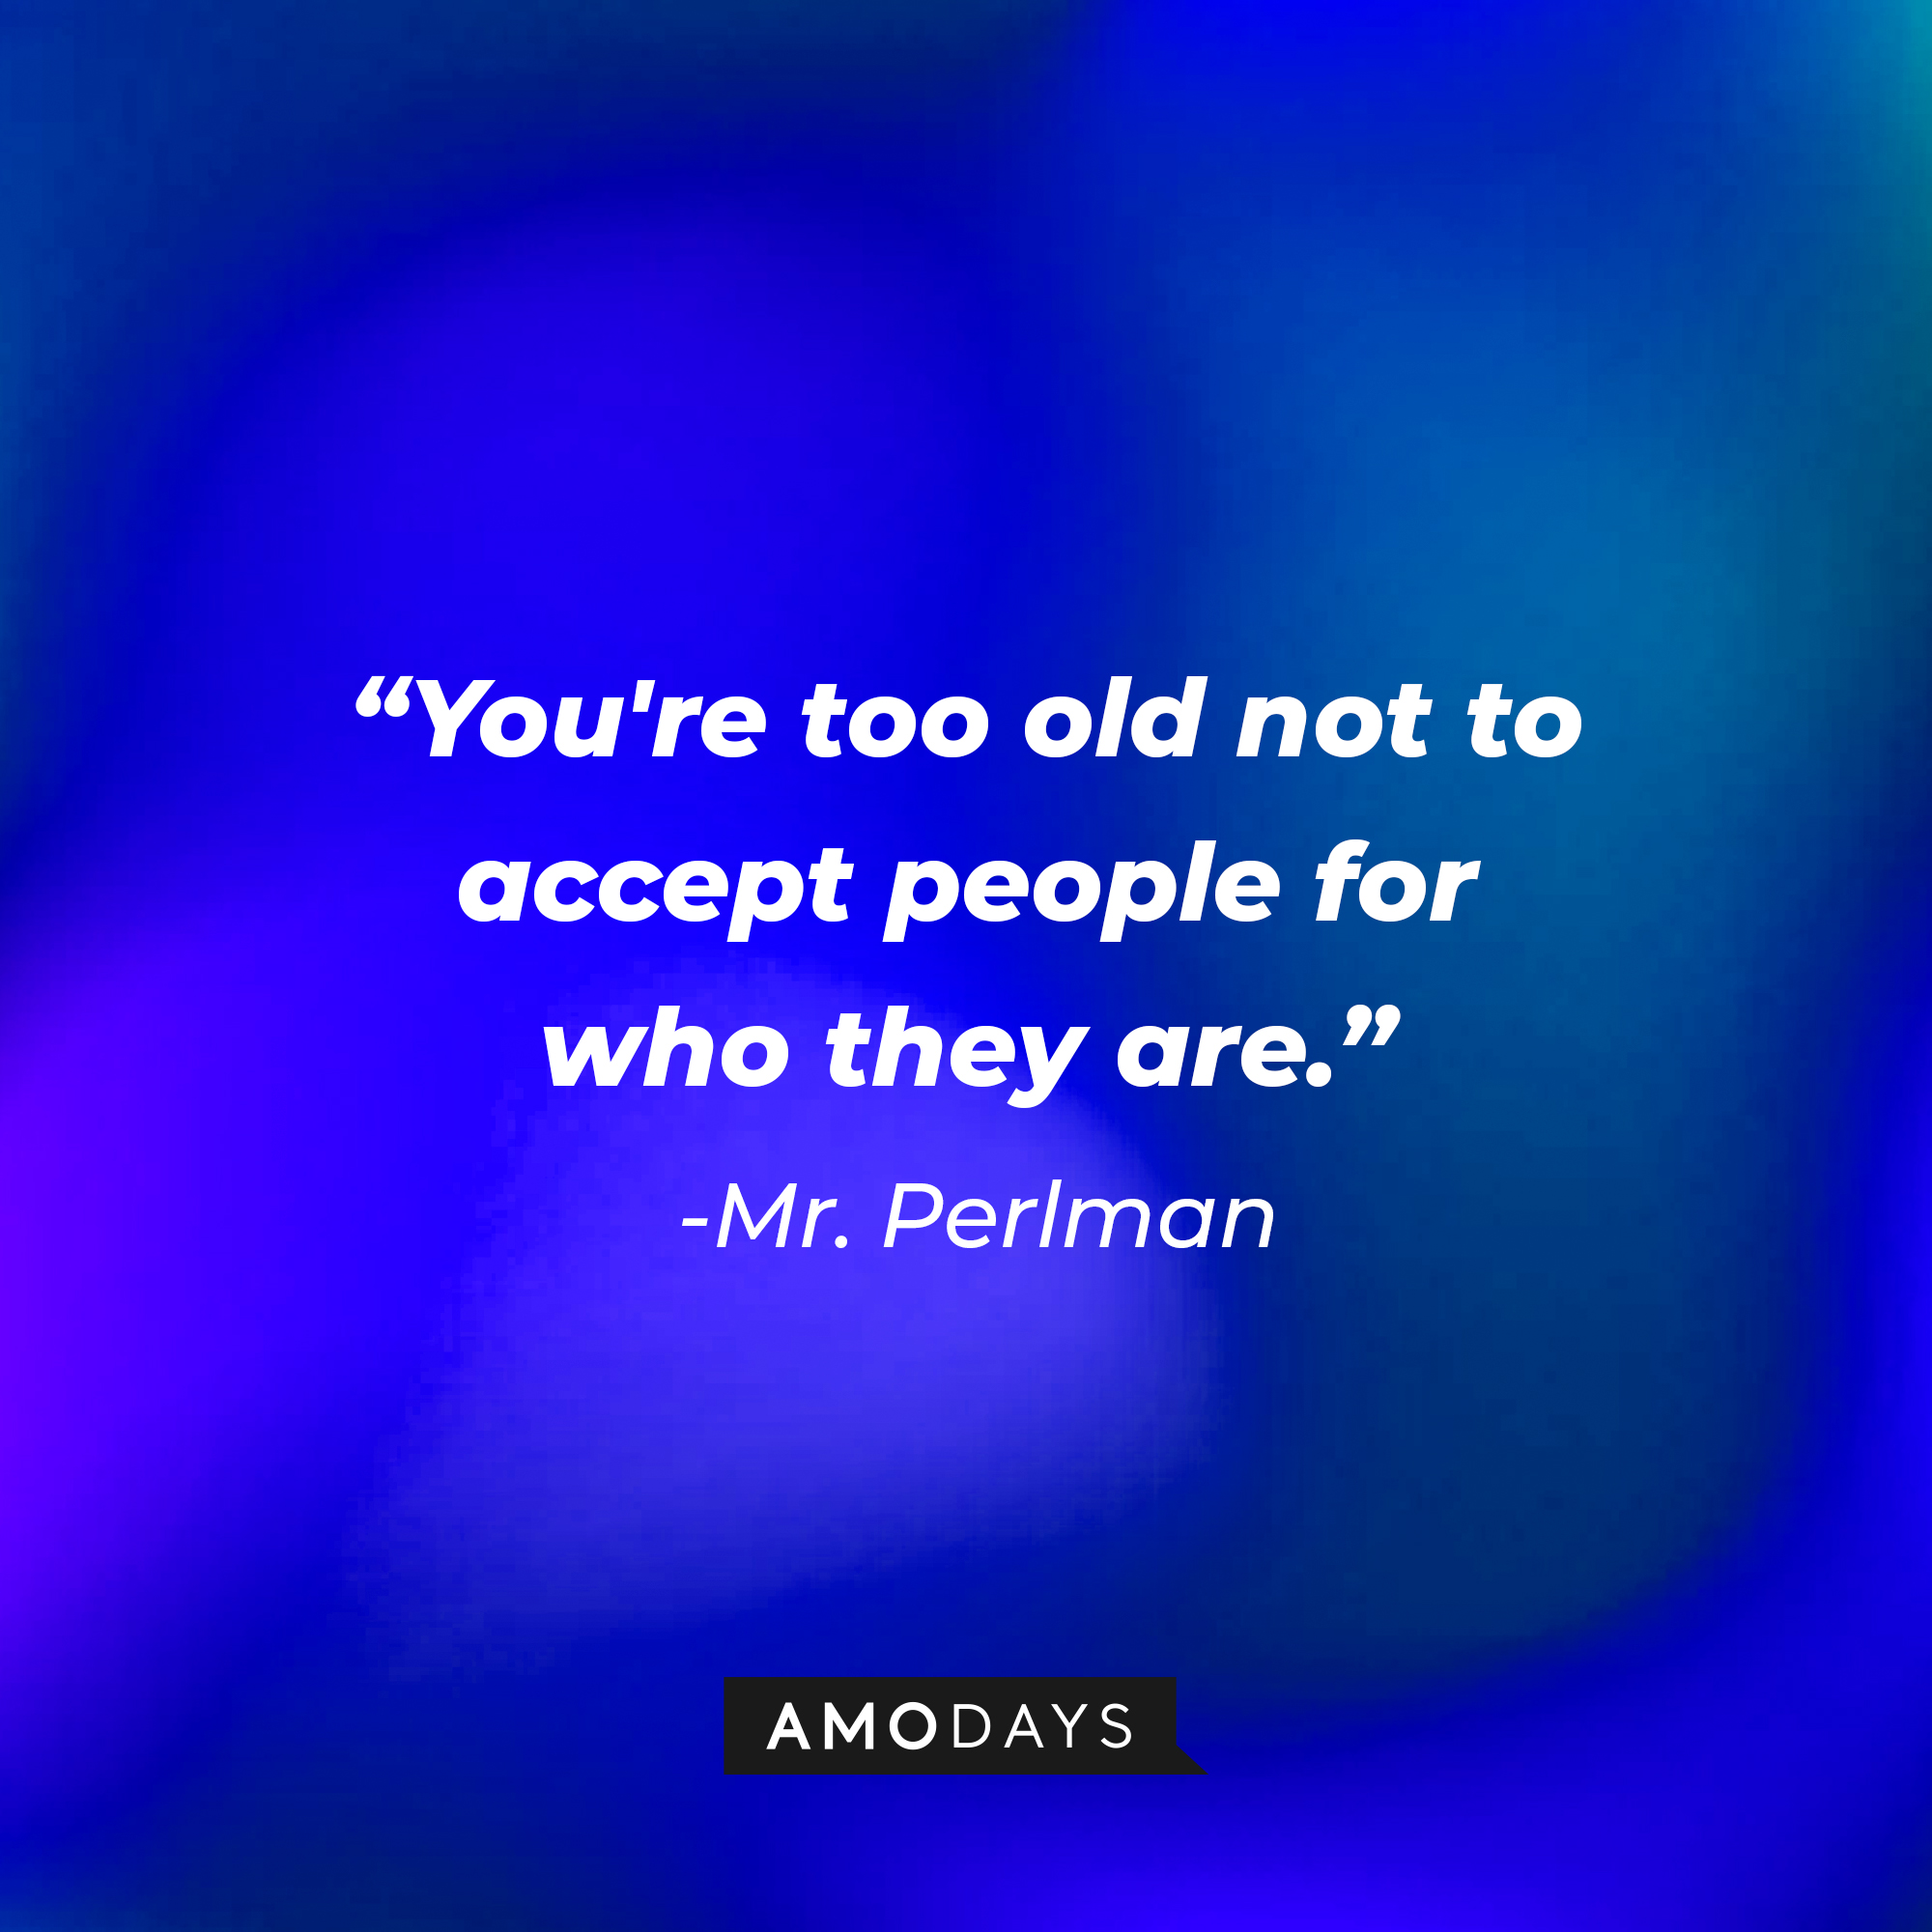 Mr. Perlman's quote: "You're too old not to accept people for who they are." | Source: AmoDays